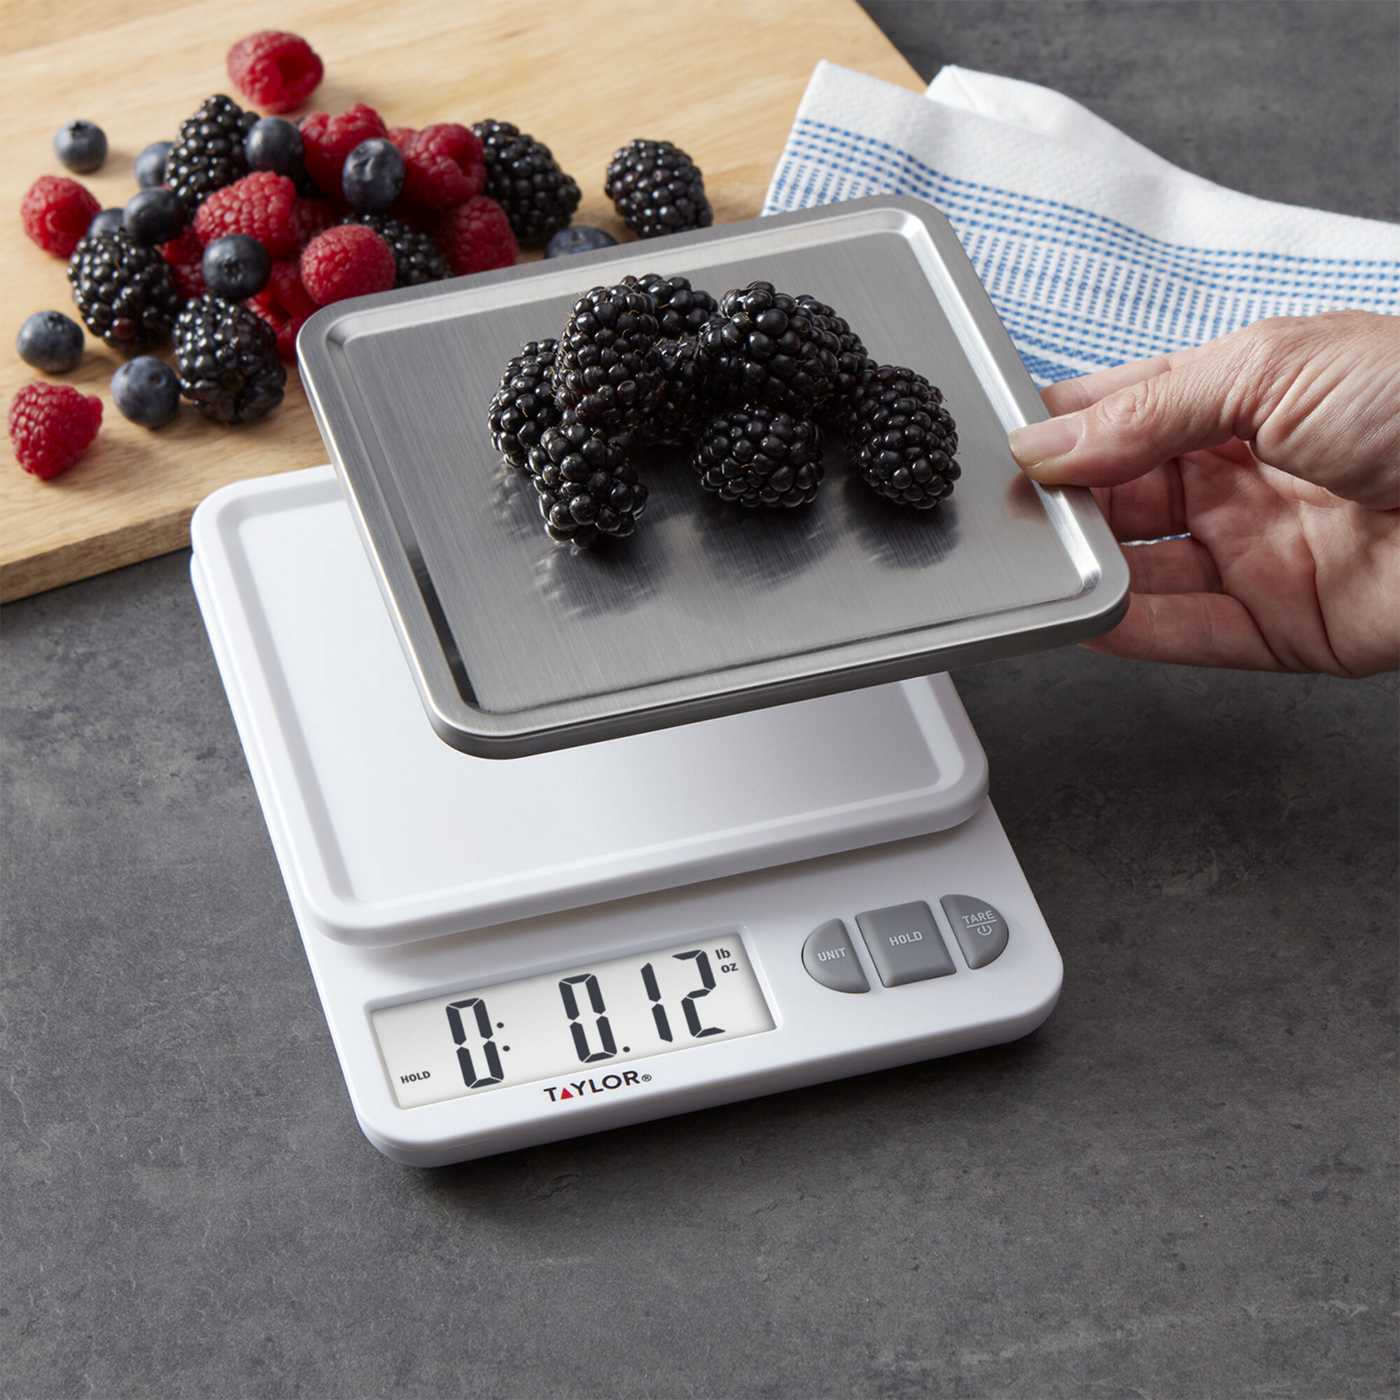 Taylor Stainless Steel Digital Kitchen Scale; image 3 of 3